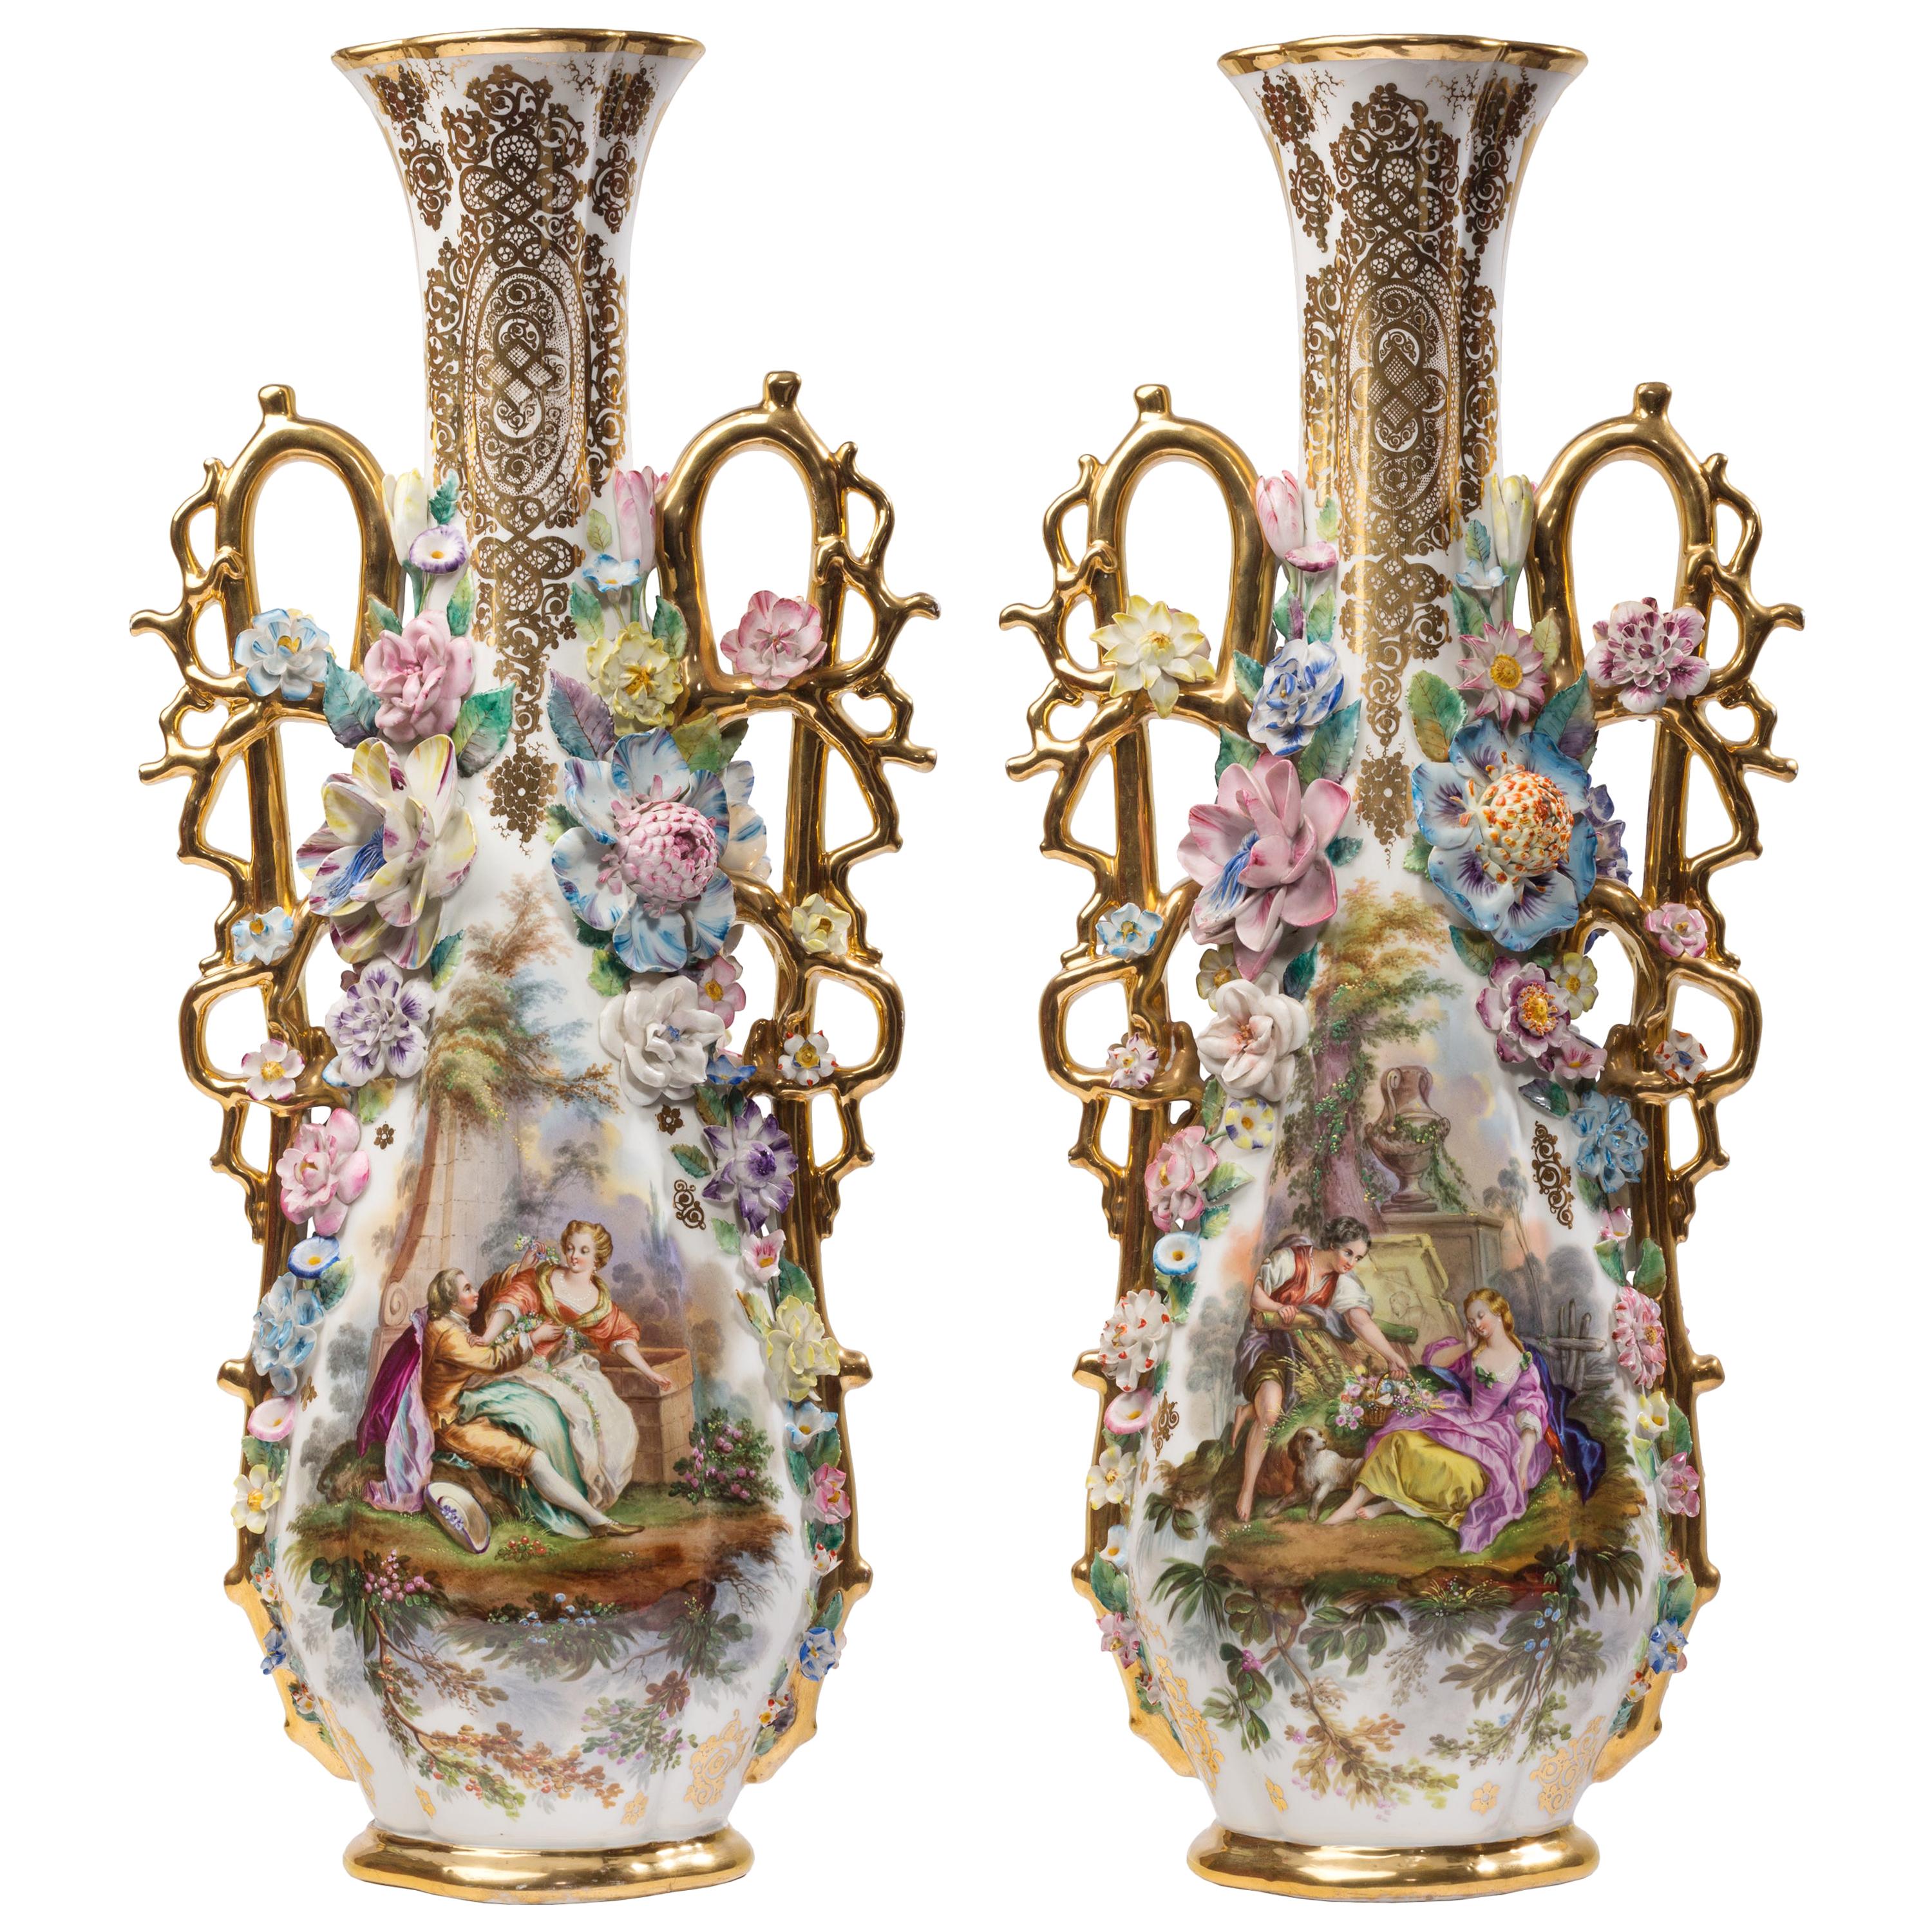 Pair of Highly Decorated Rococo Style French Porcelain Vases, Att. Jacob Petit For Sale